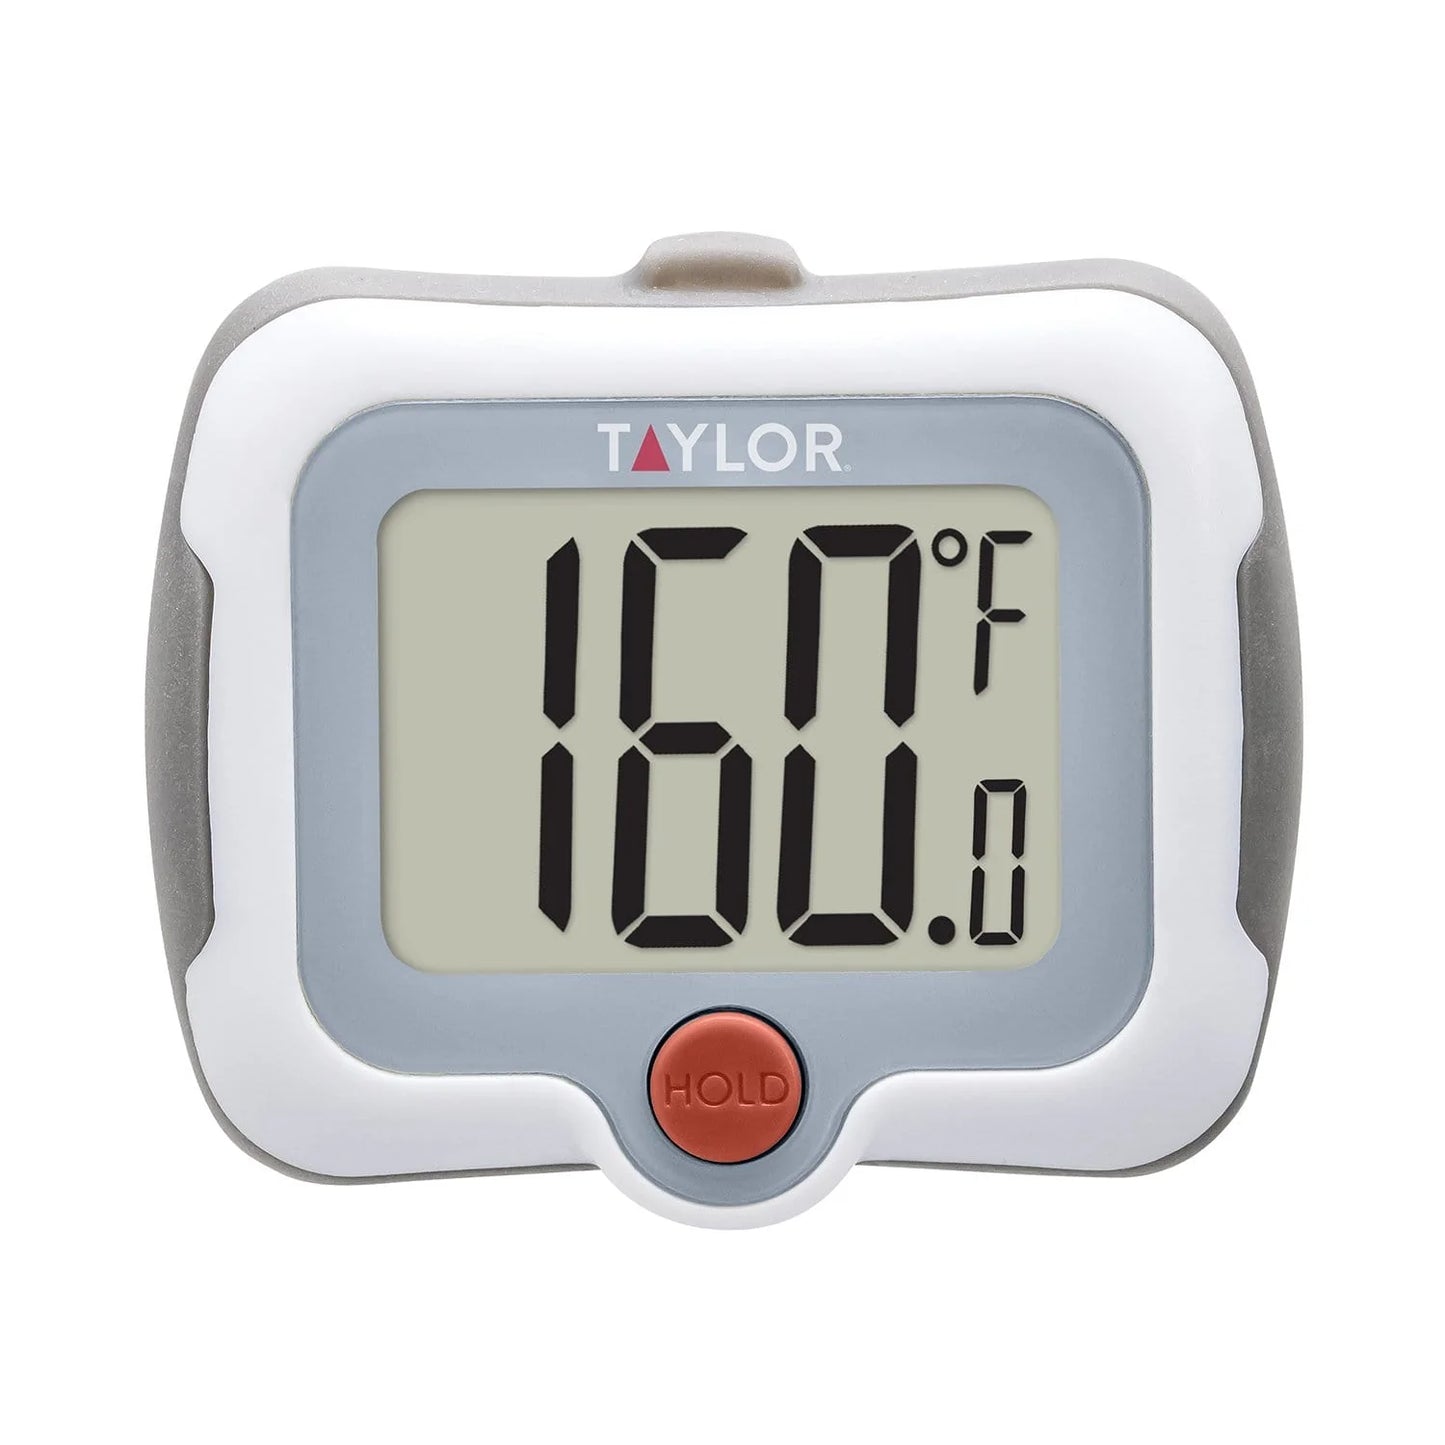 Taylor Pivoting Display Thermometer